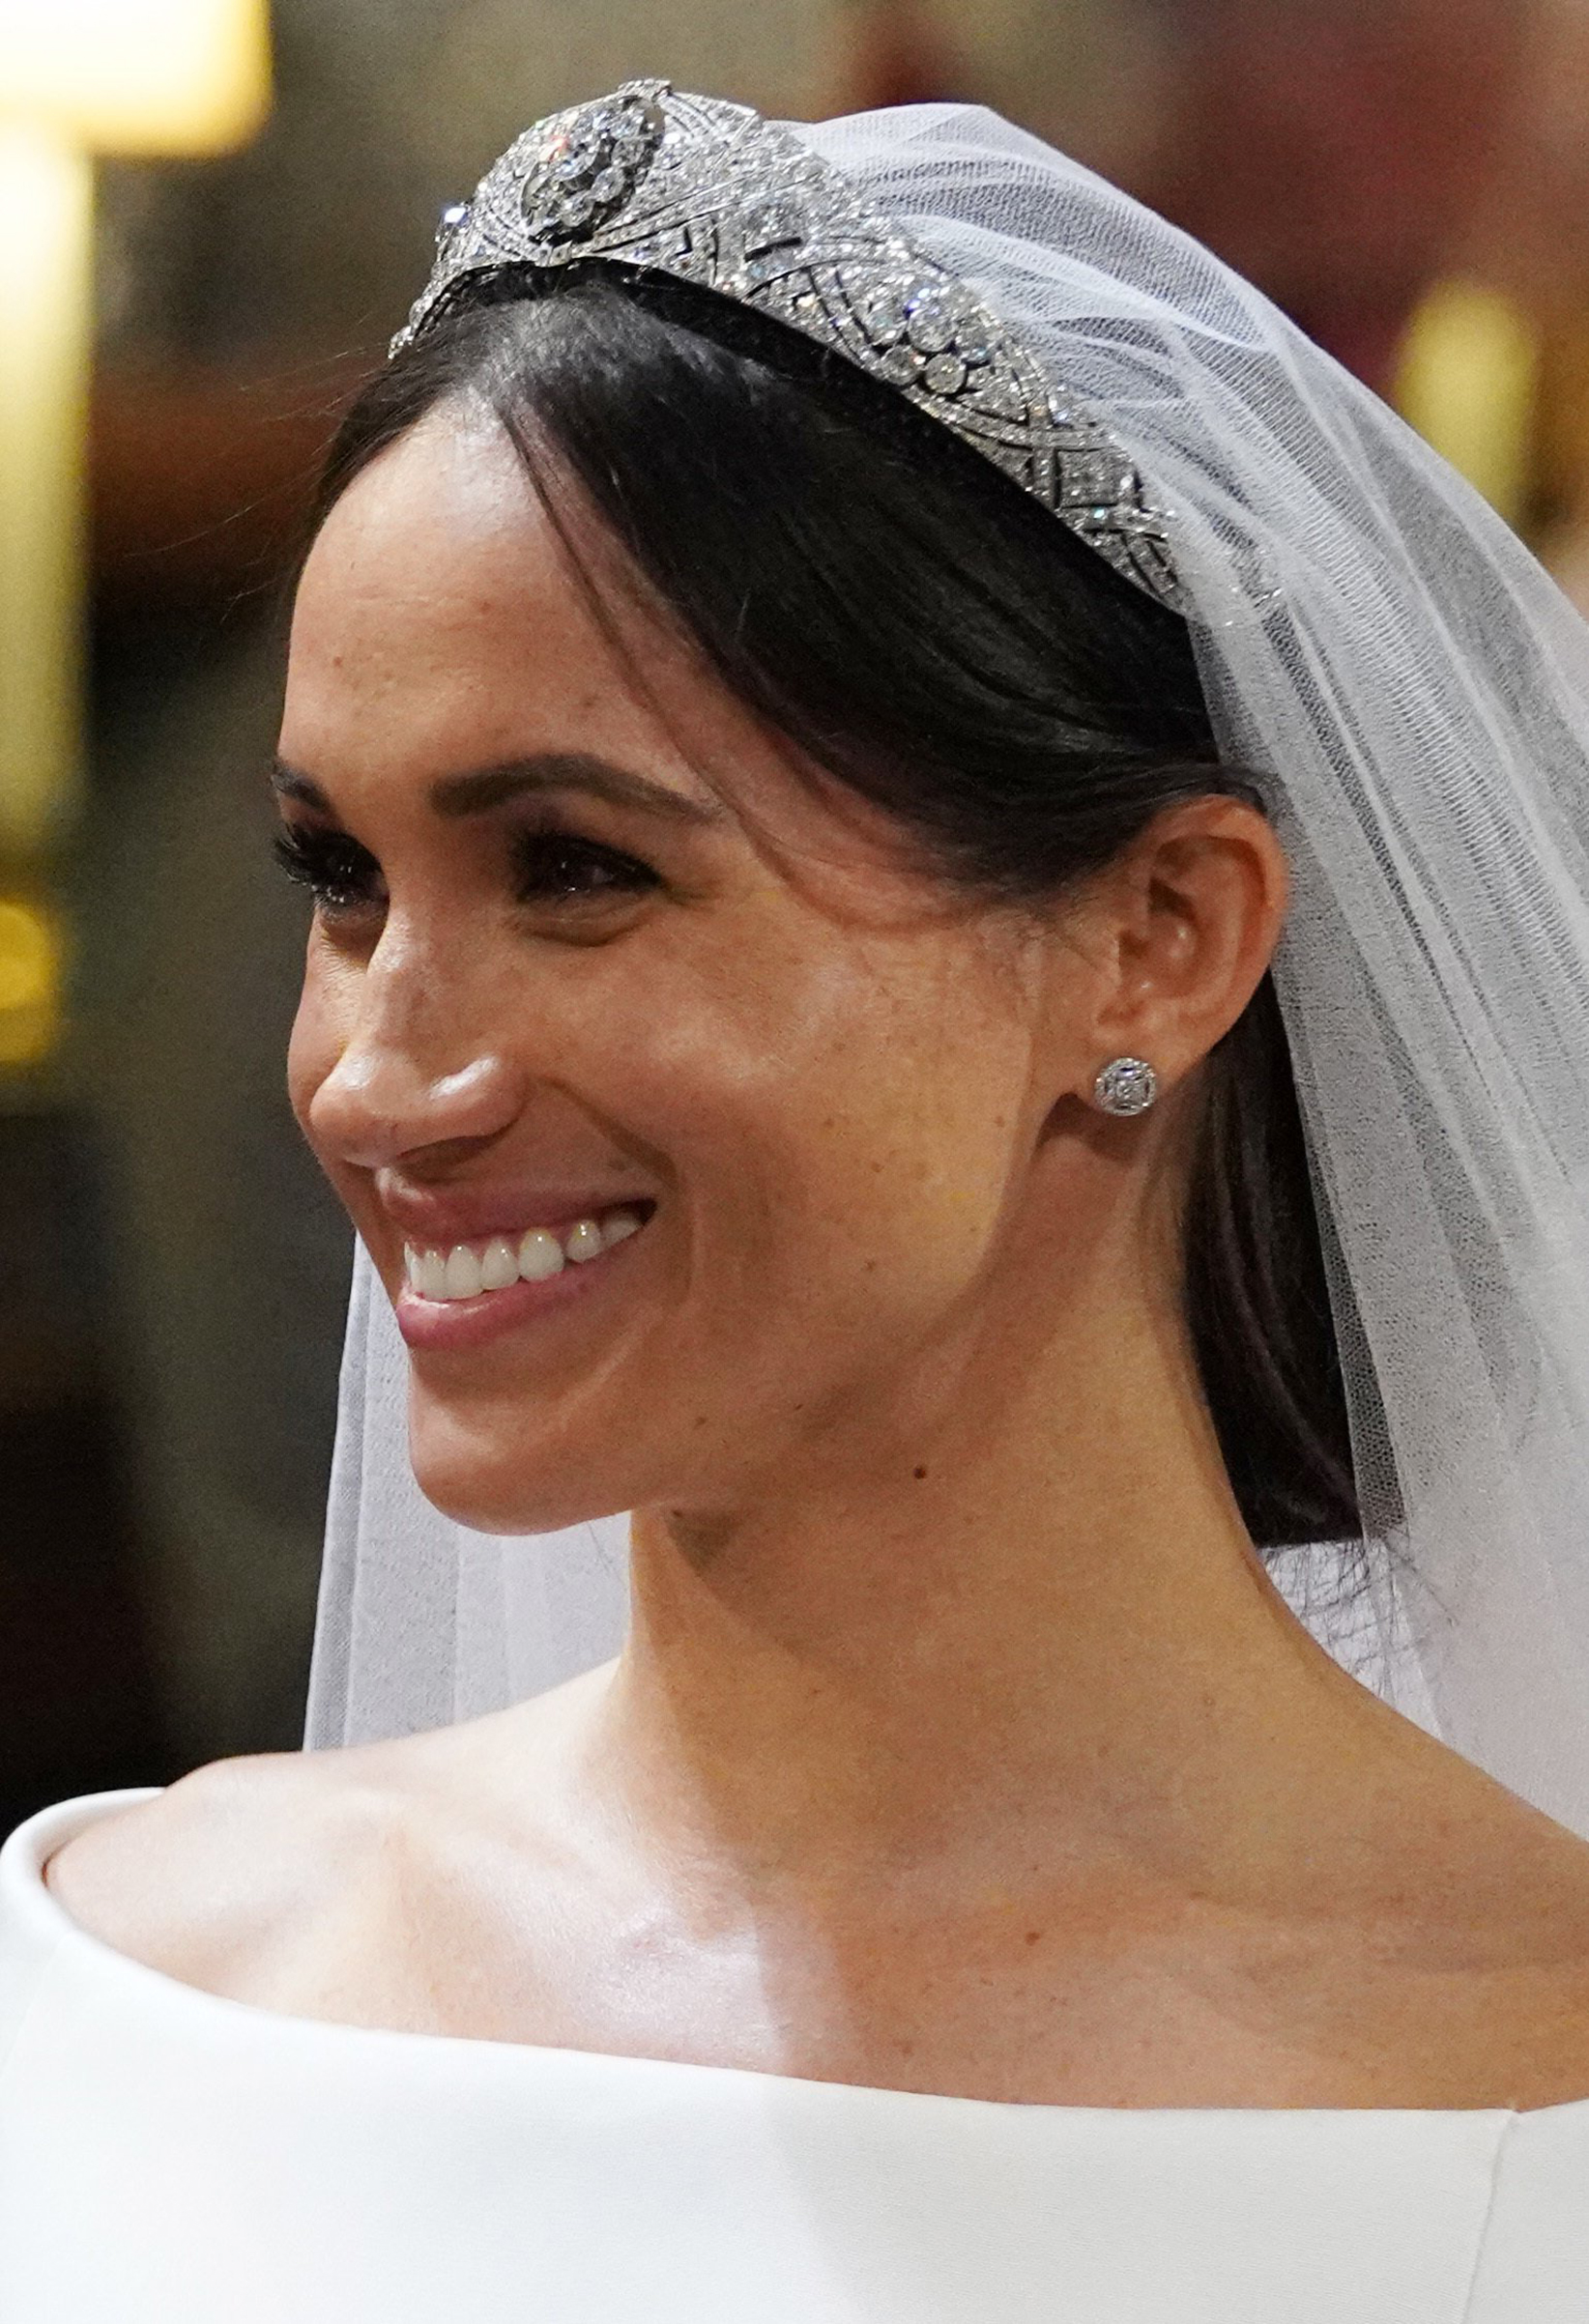 Meghan Markle in St George's Chapel at Windsor Castle during her wedding to Prince Harry, May 19, 2018. (Jonathan—PA Wire)